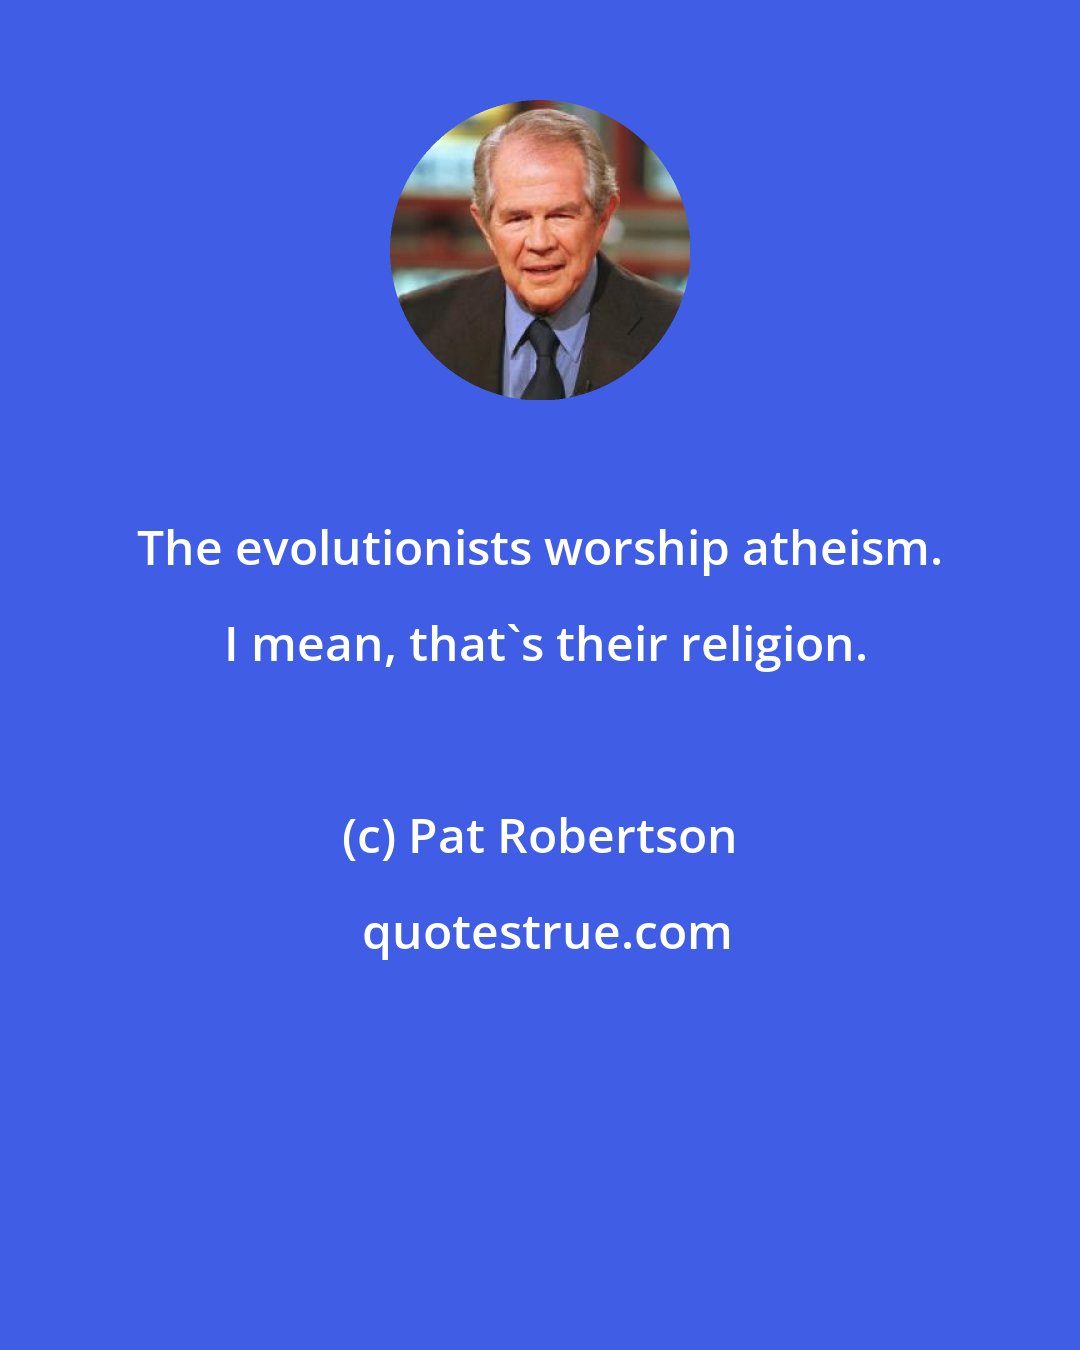 Pat Robertson: The evolutionists worship atheism.  I mean, that's their religion.